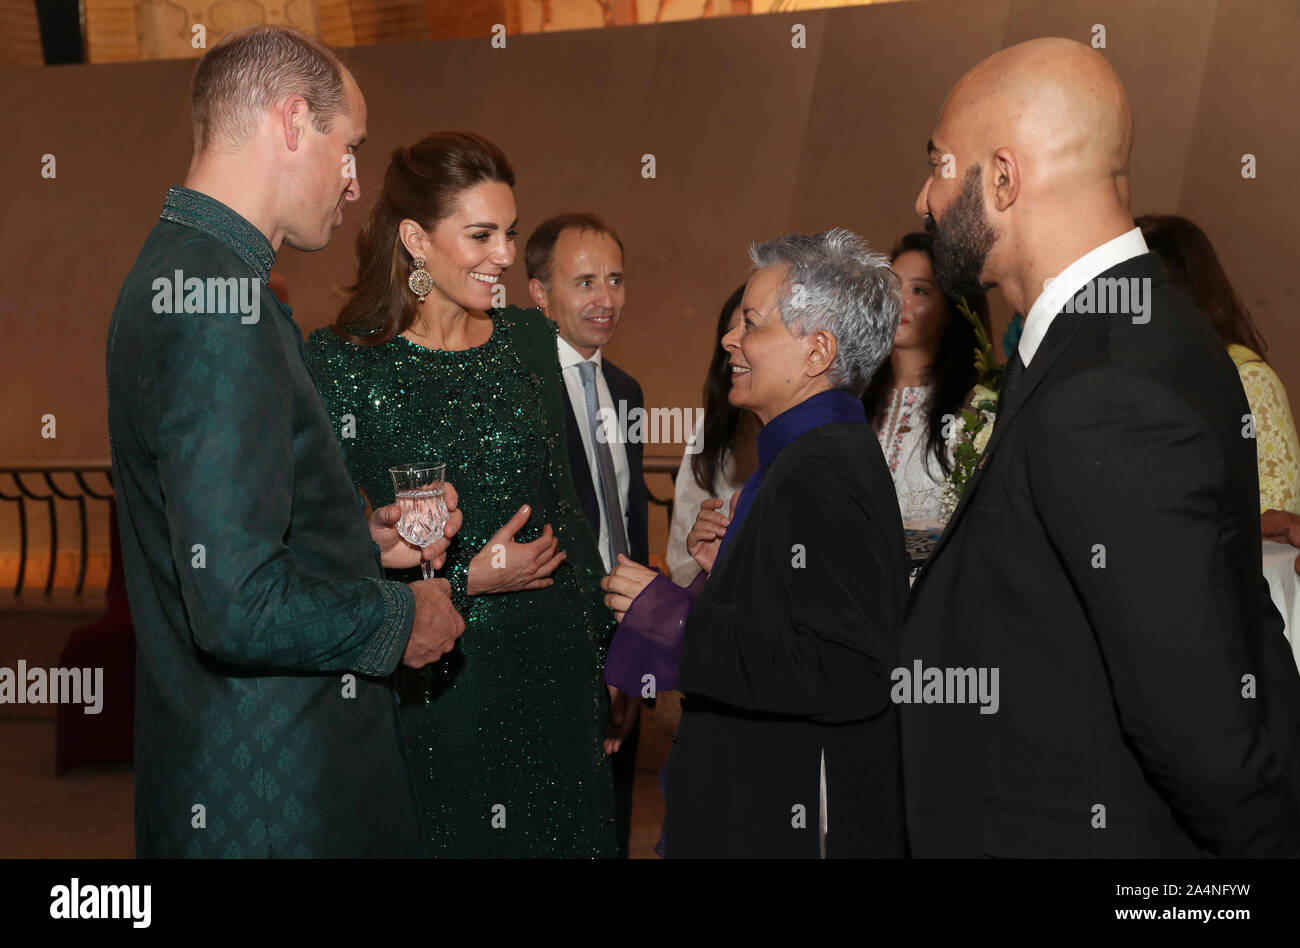 The Duke and Duchess of Cambridge speak with a guest as they attend a  reception hosted by the British High Commissioner to Pakistan Thomas Drew  CMG at the National Monument in Islamabad